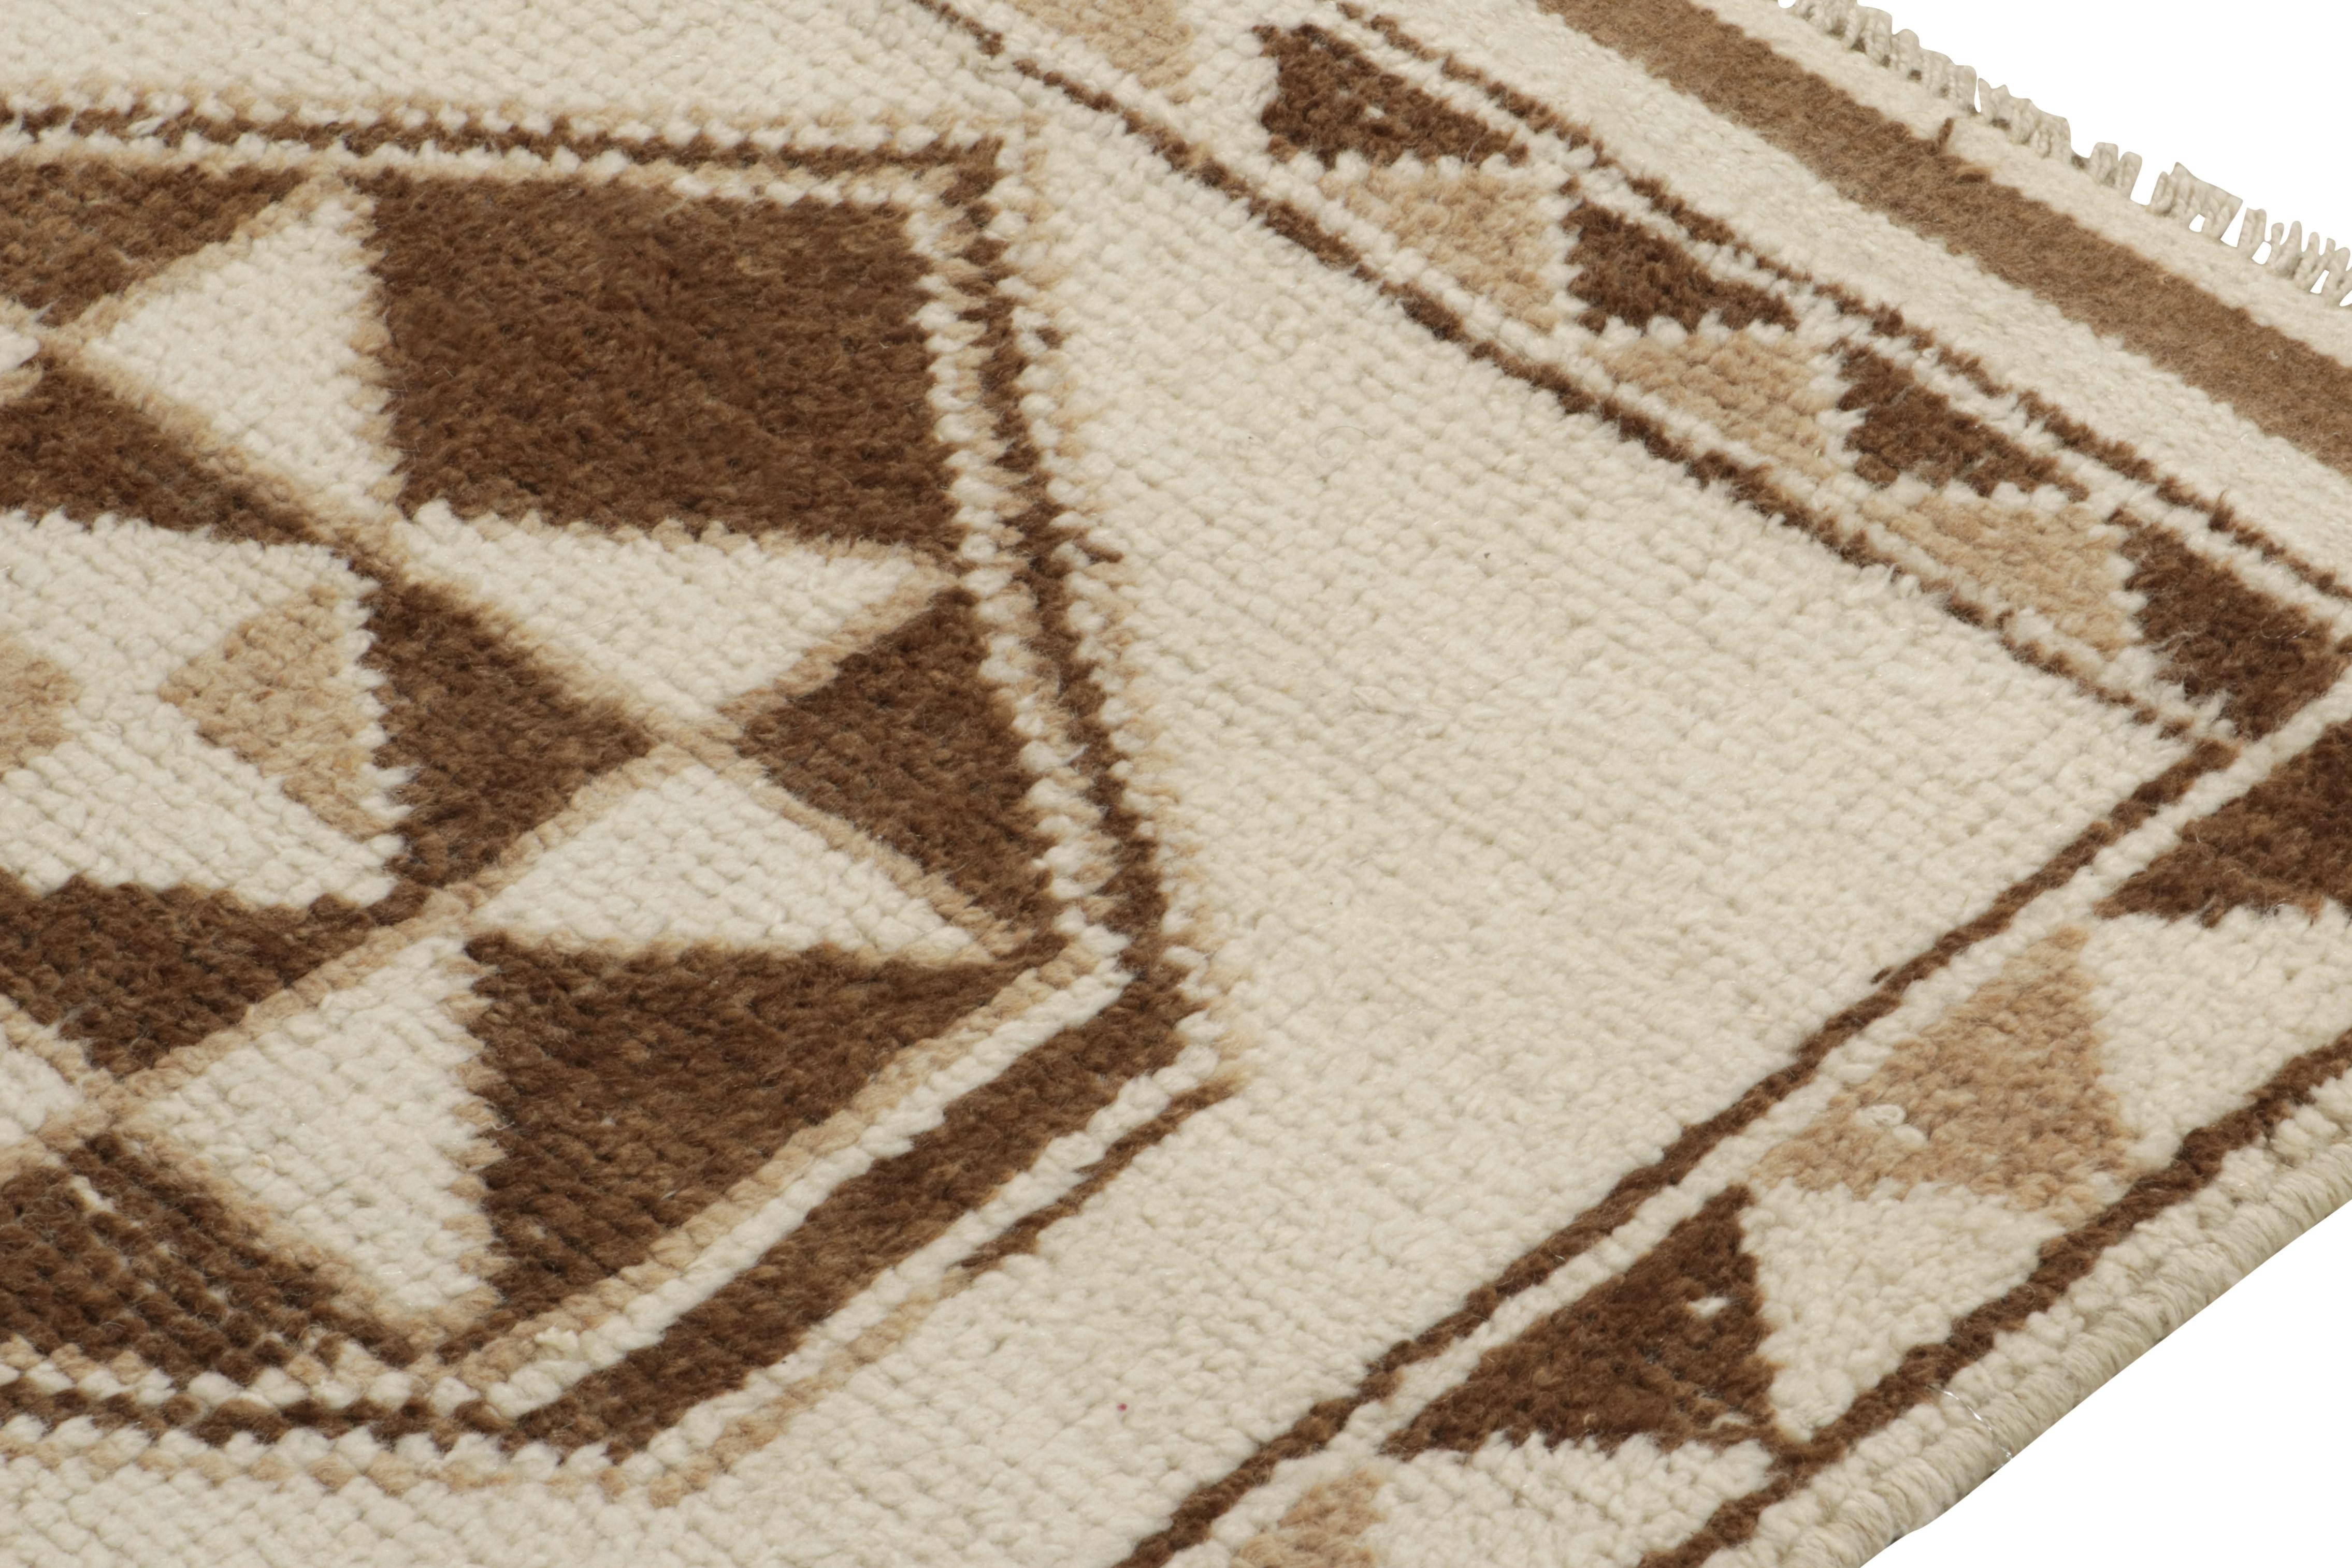 Vintage Tribal Runner in White & Beige-Brown Geometric Pattern, by Rug & Kilim In Good Condition For Sale In Long Island City, NY